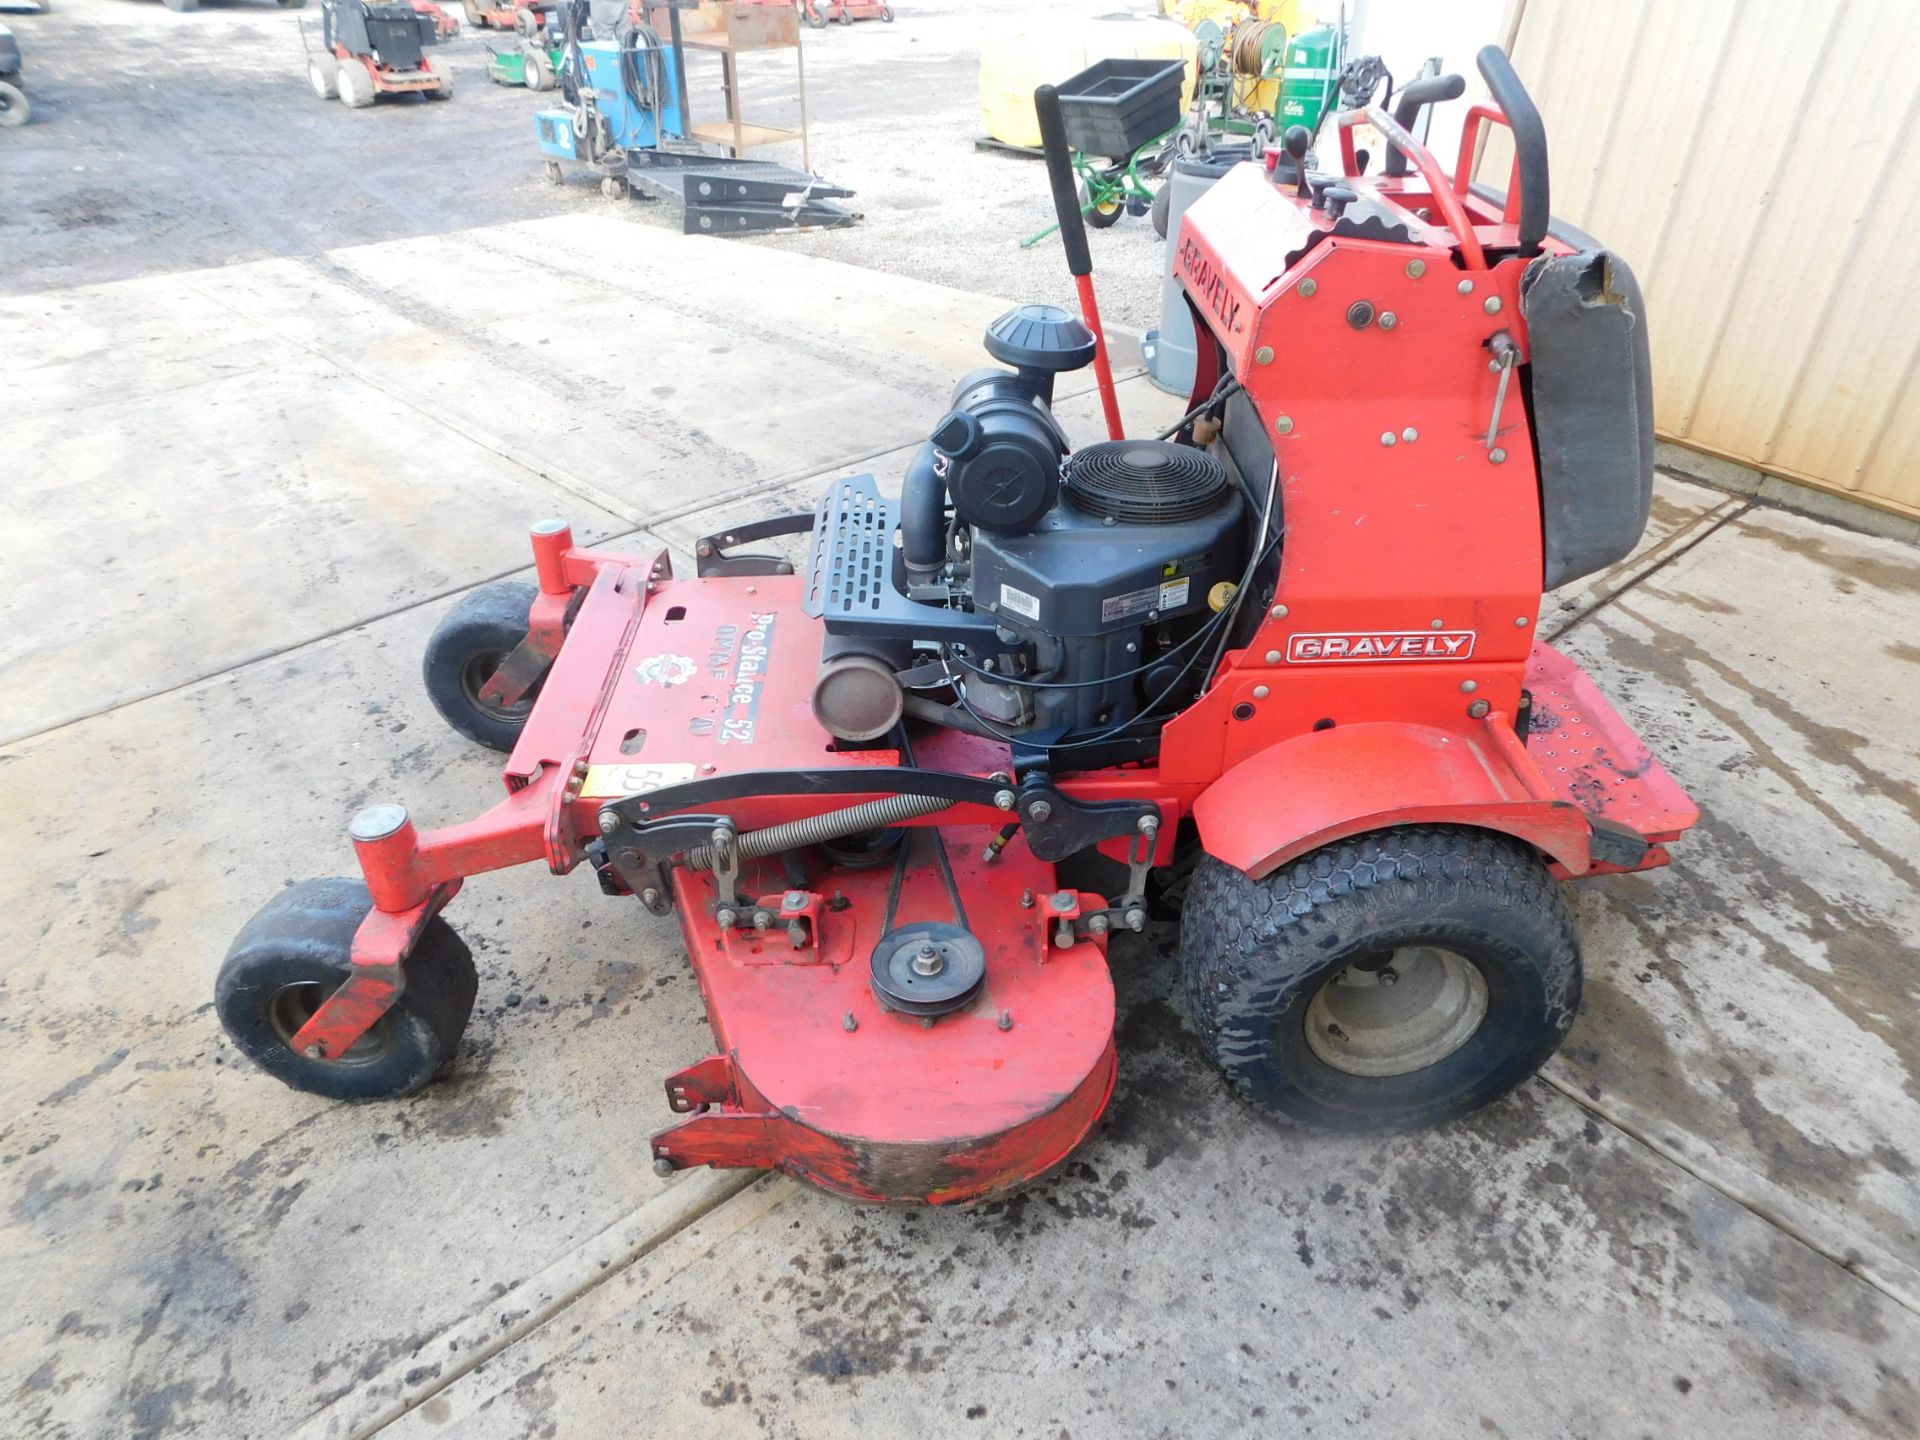 Gravely Pro-Stance 52 Stand on Mower SN#020377, 52"deck, Kawaski FX691VGas Enngine 2,332hrs. - Image 4 of 12